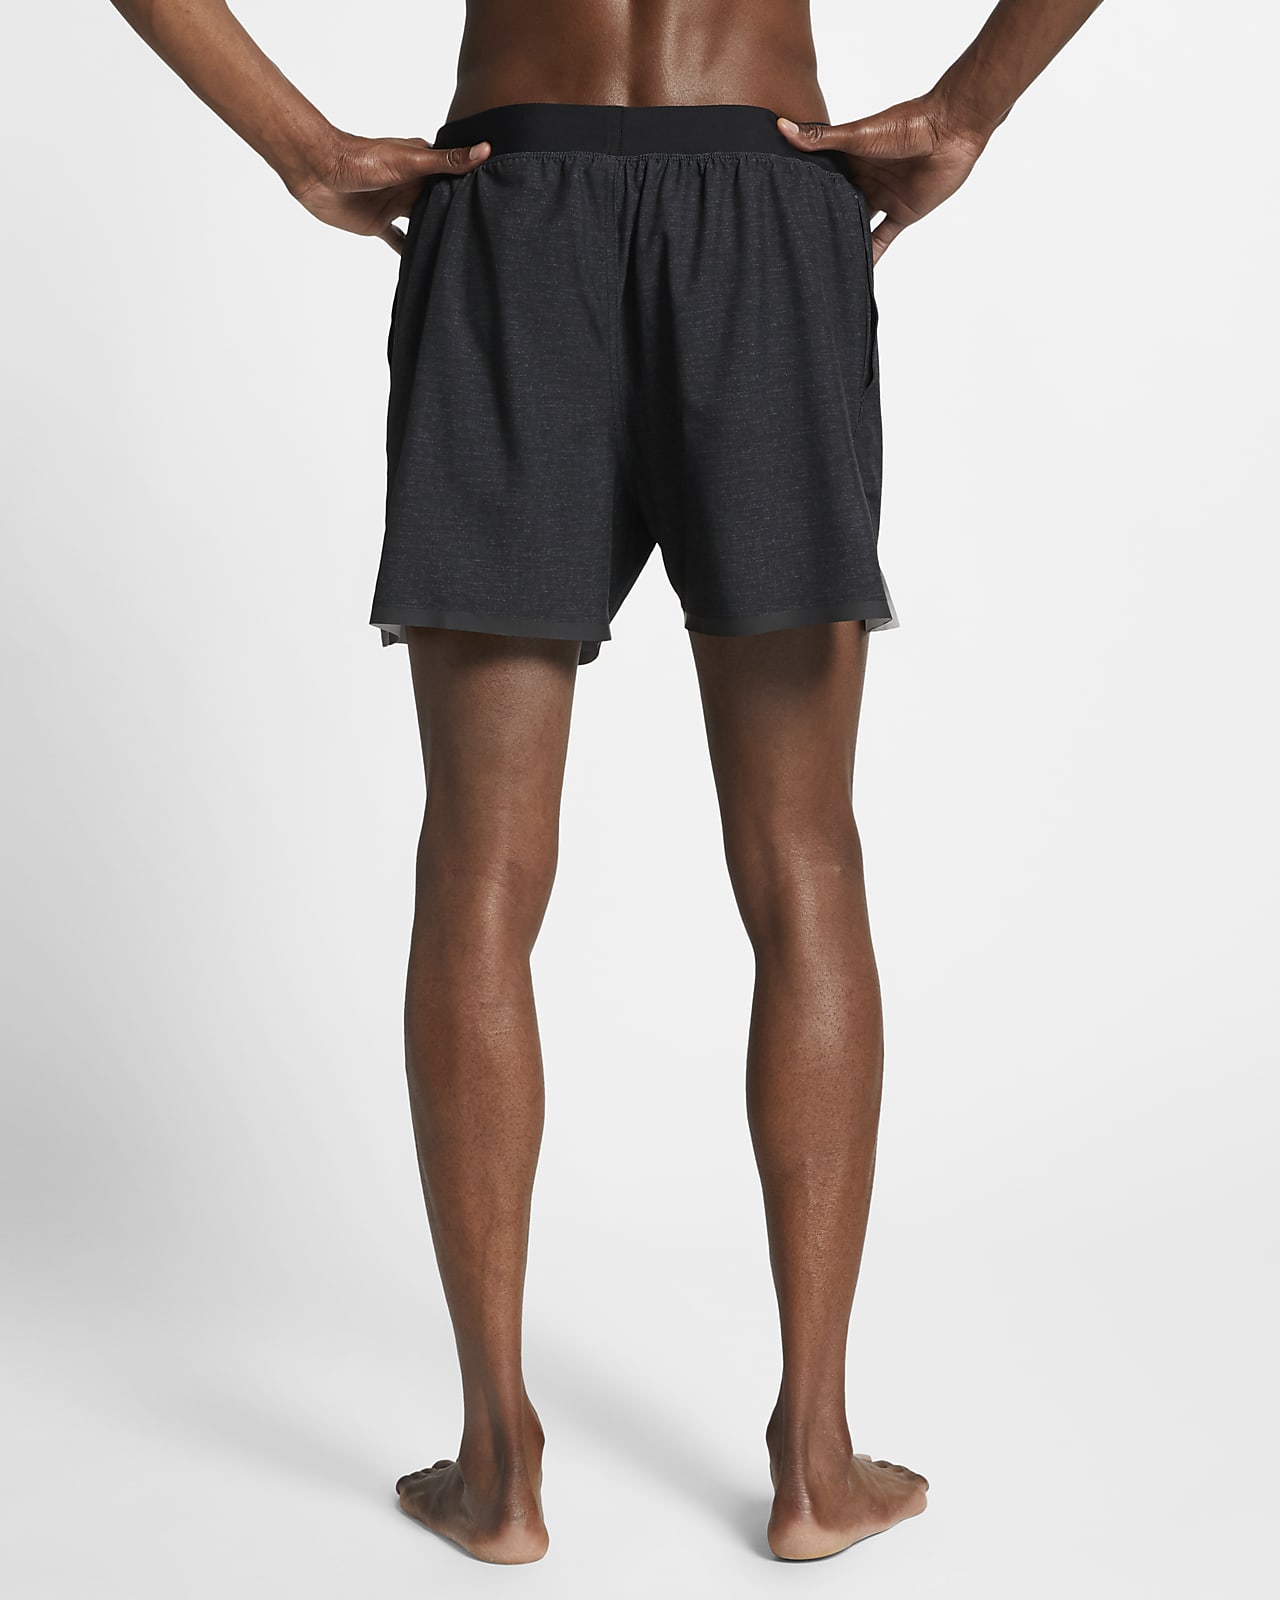 nike volleyball shorts men's